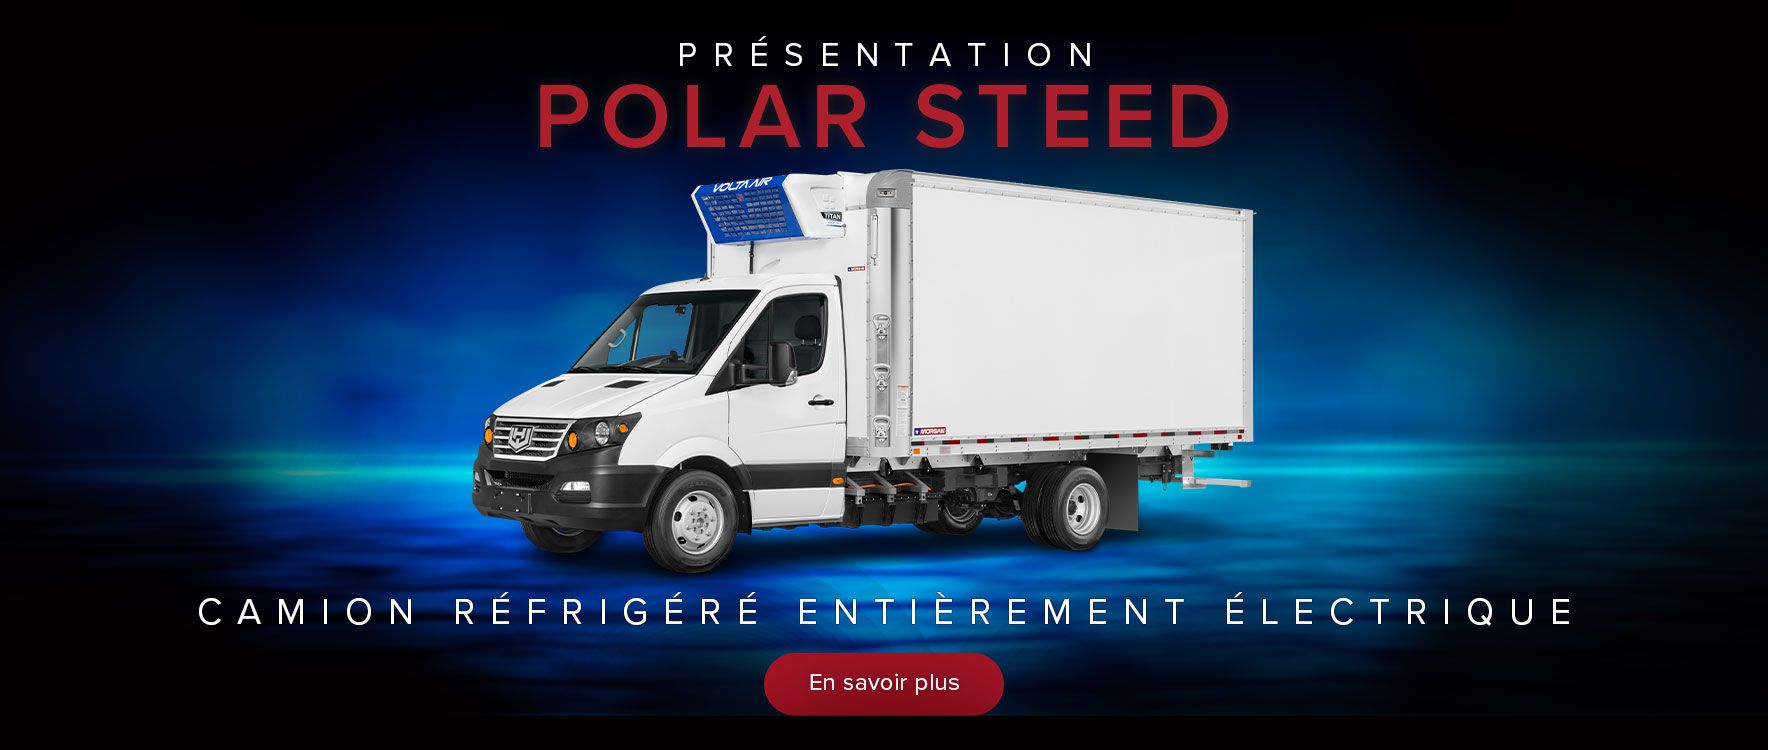 All-Electric Refrigerated Truck